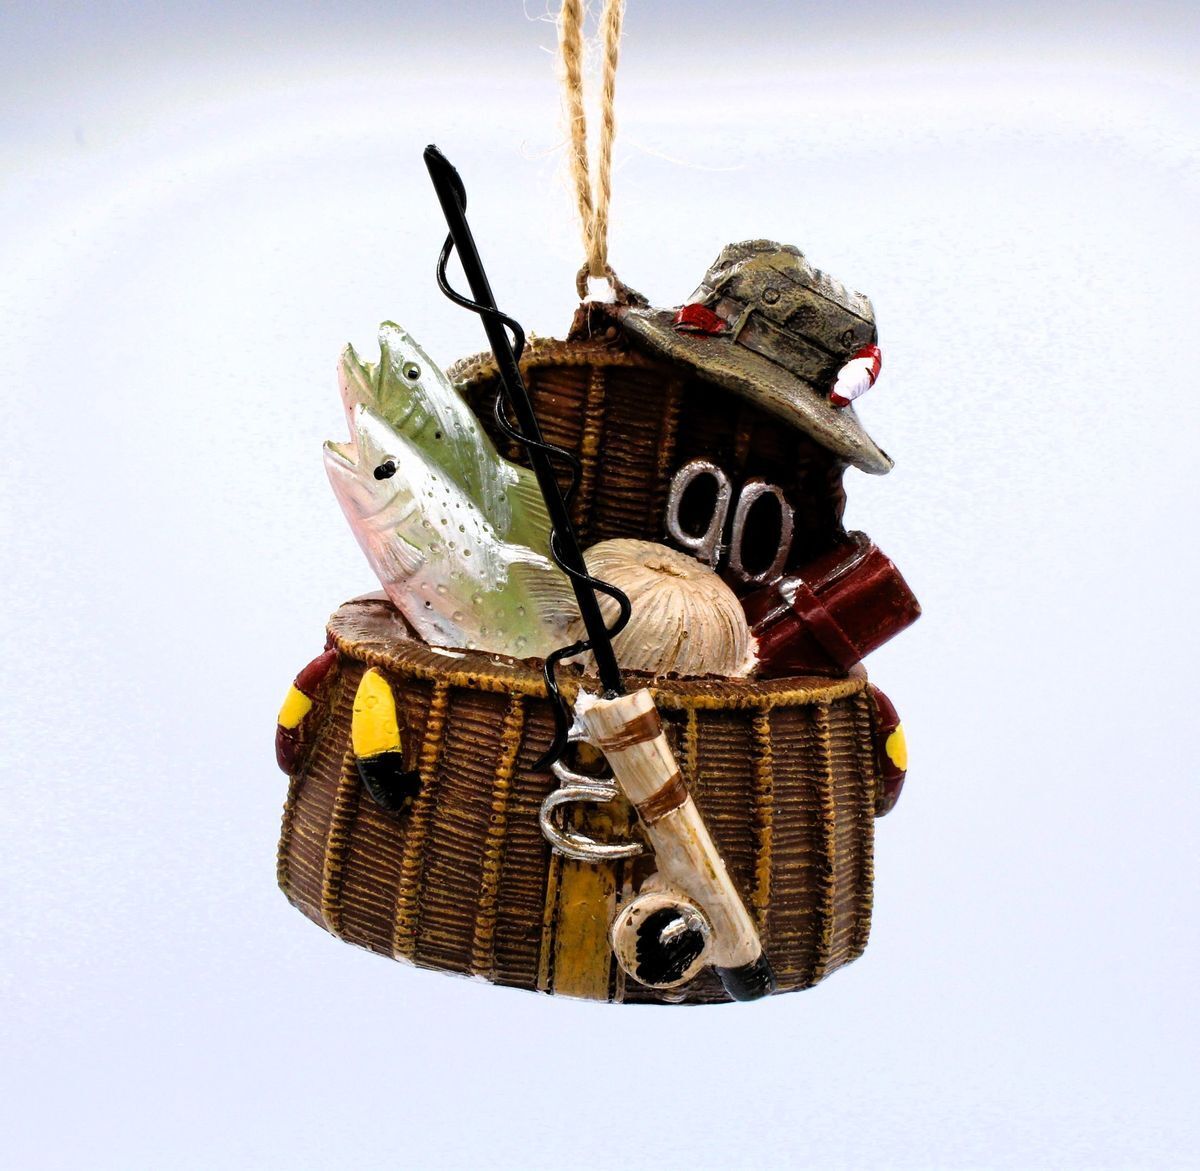 Fishing basket with fish and gear